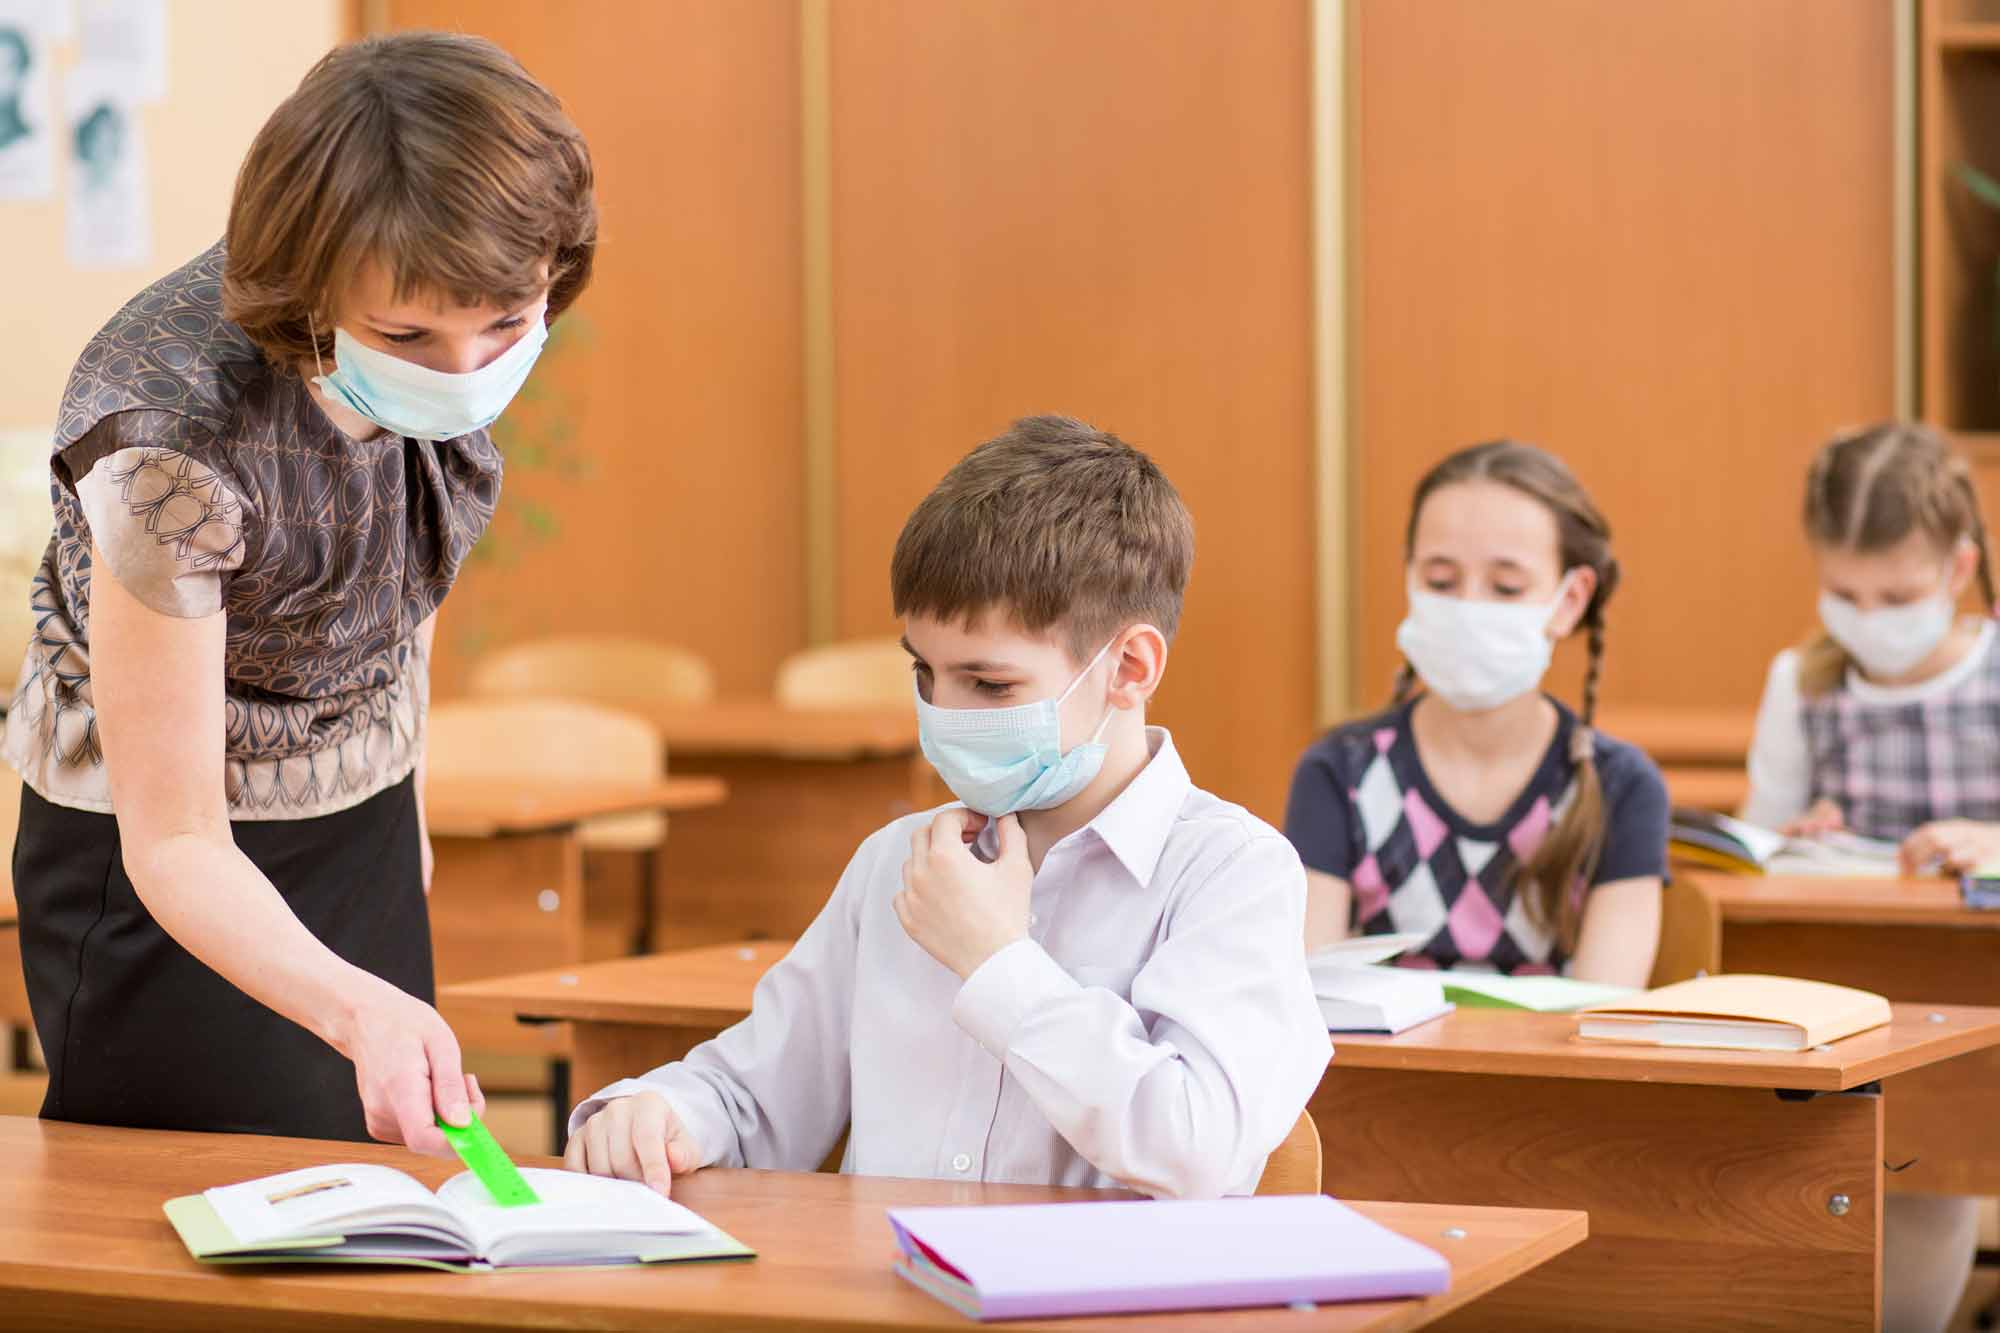 masked teacher and students in school classroom